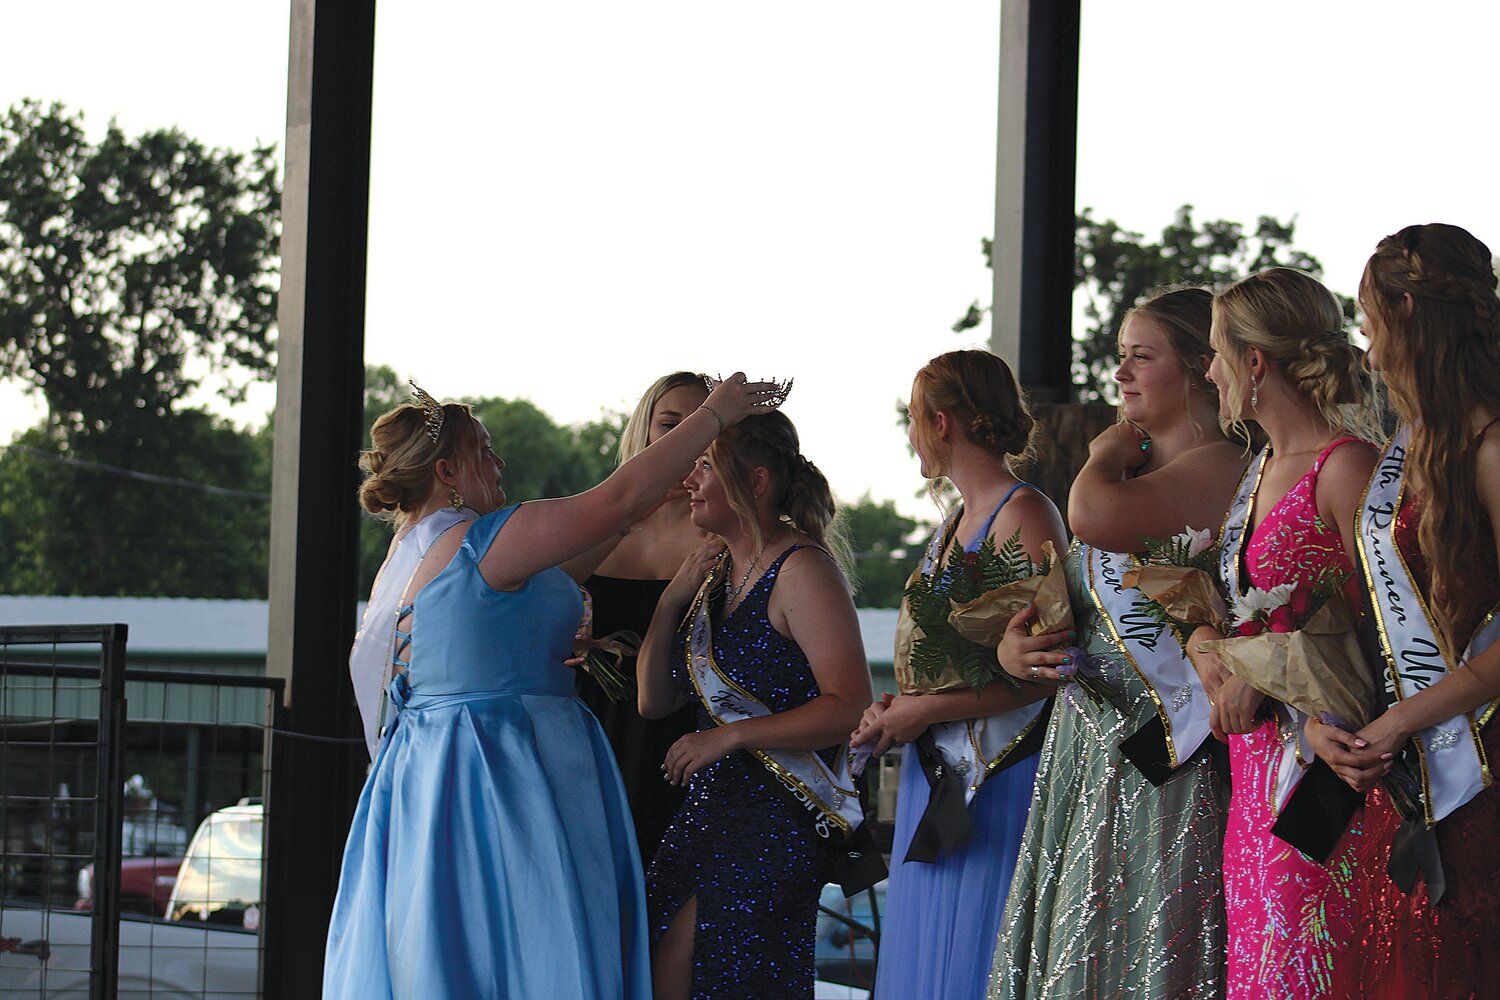 2022 Fair Queen Payton Duncan crowns 2023 Queen Kelsey Miller while the rest of the court looks on.